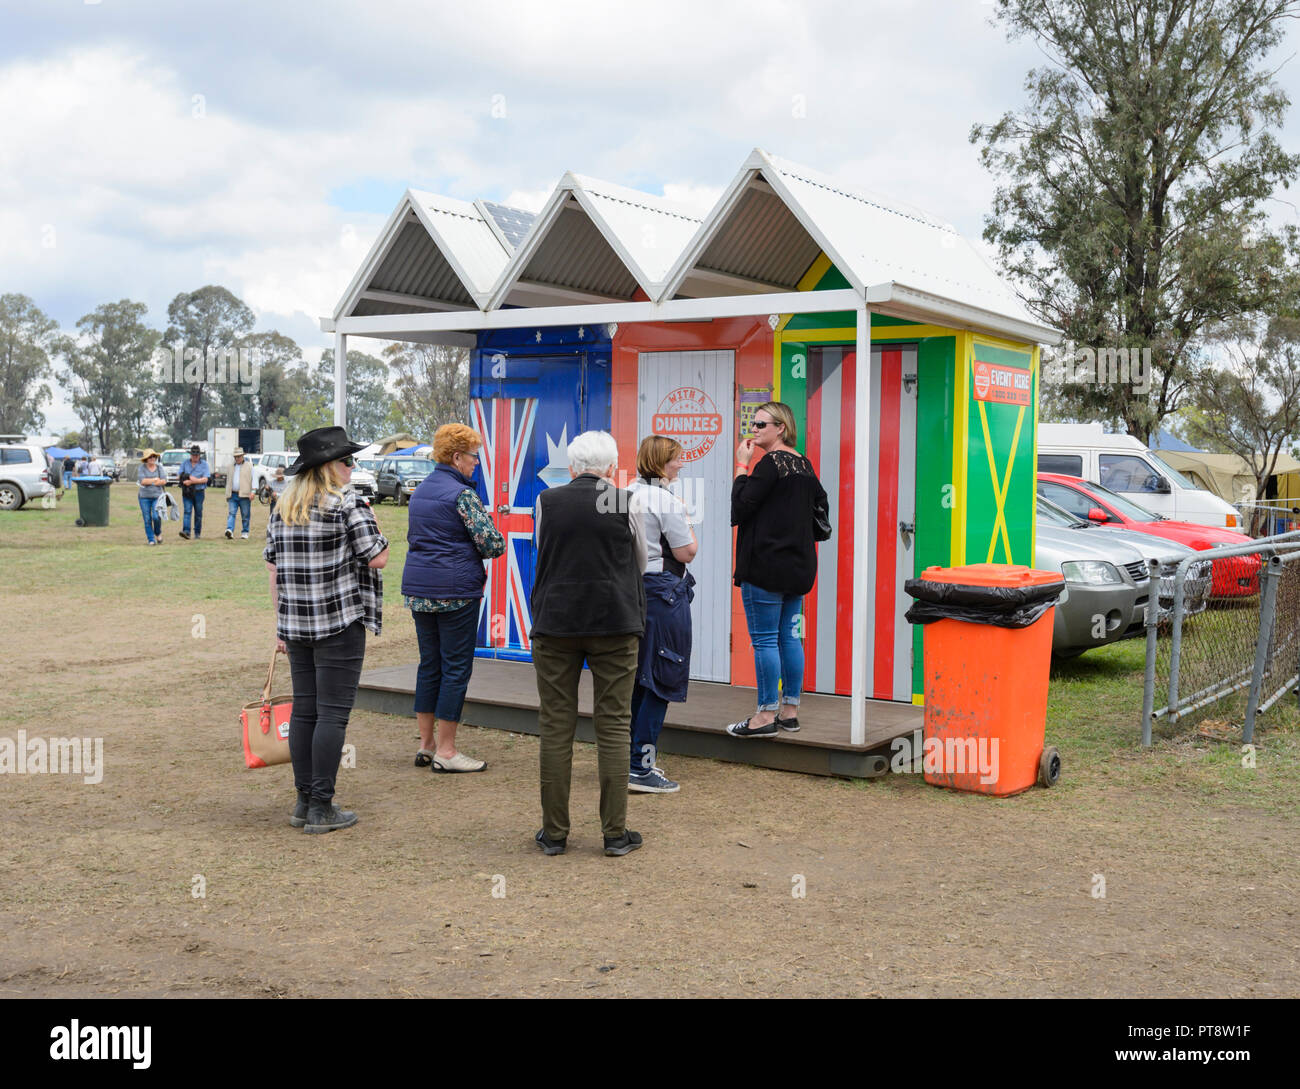 Ladies queueing up at unusual public toilets or dunnies looking like beach huts, Australian Camp Oven Festival 2018, Millmerran, Southern Queensland, Stock Photo